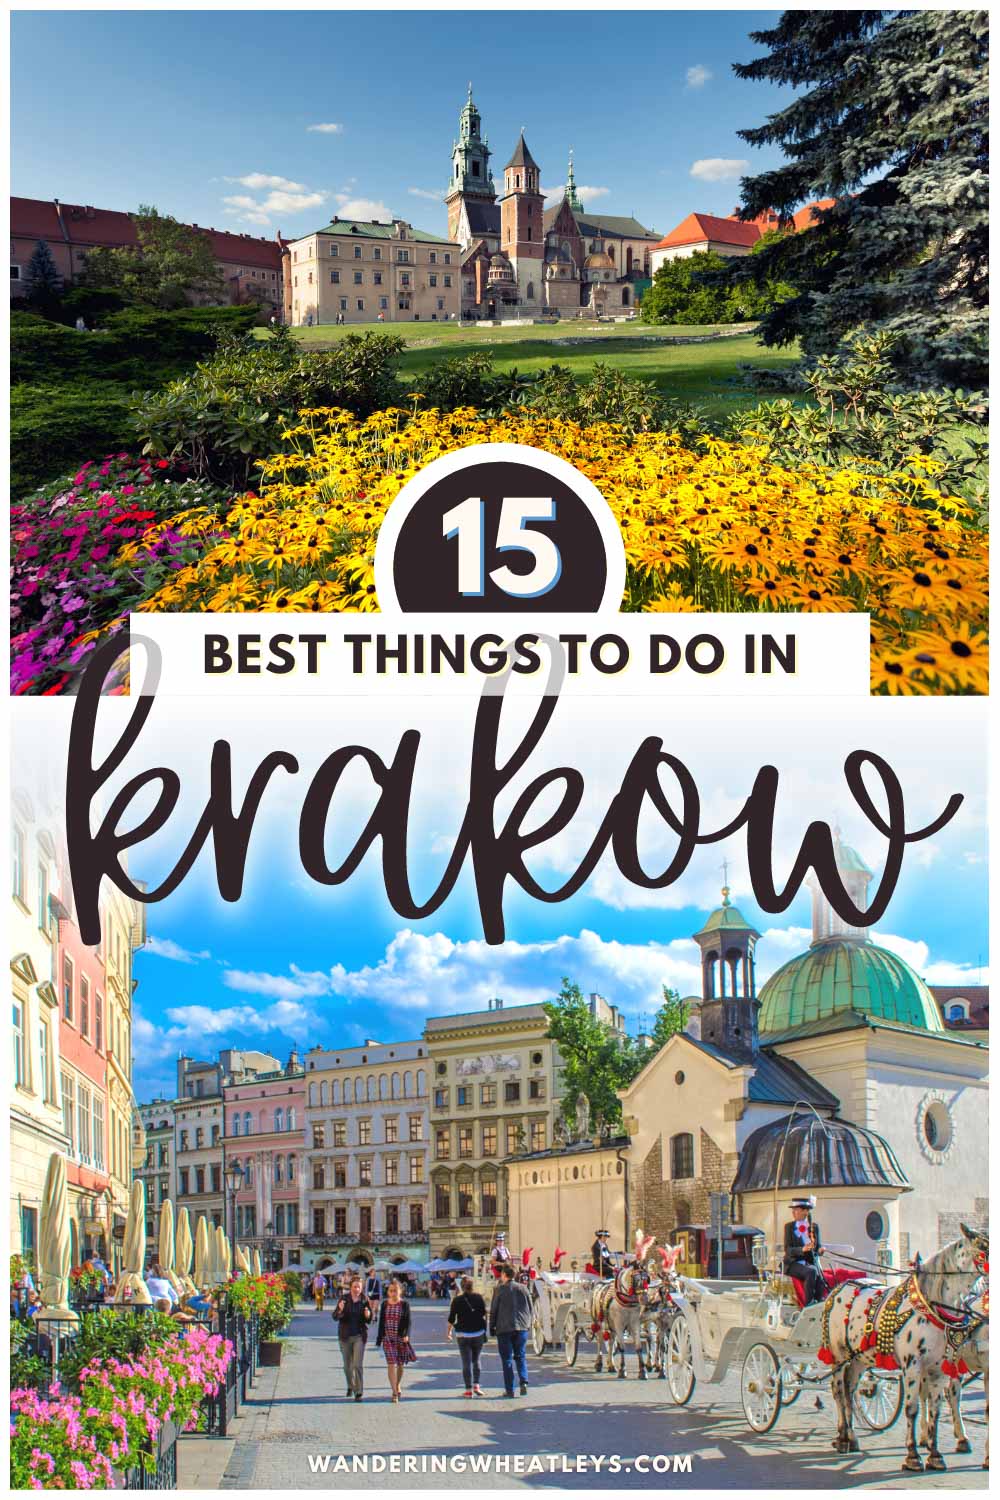 The Best Things to do in Krakow